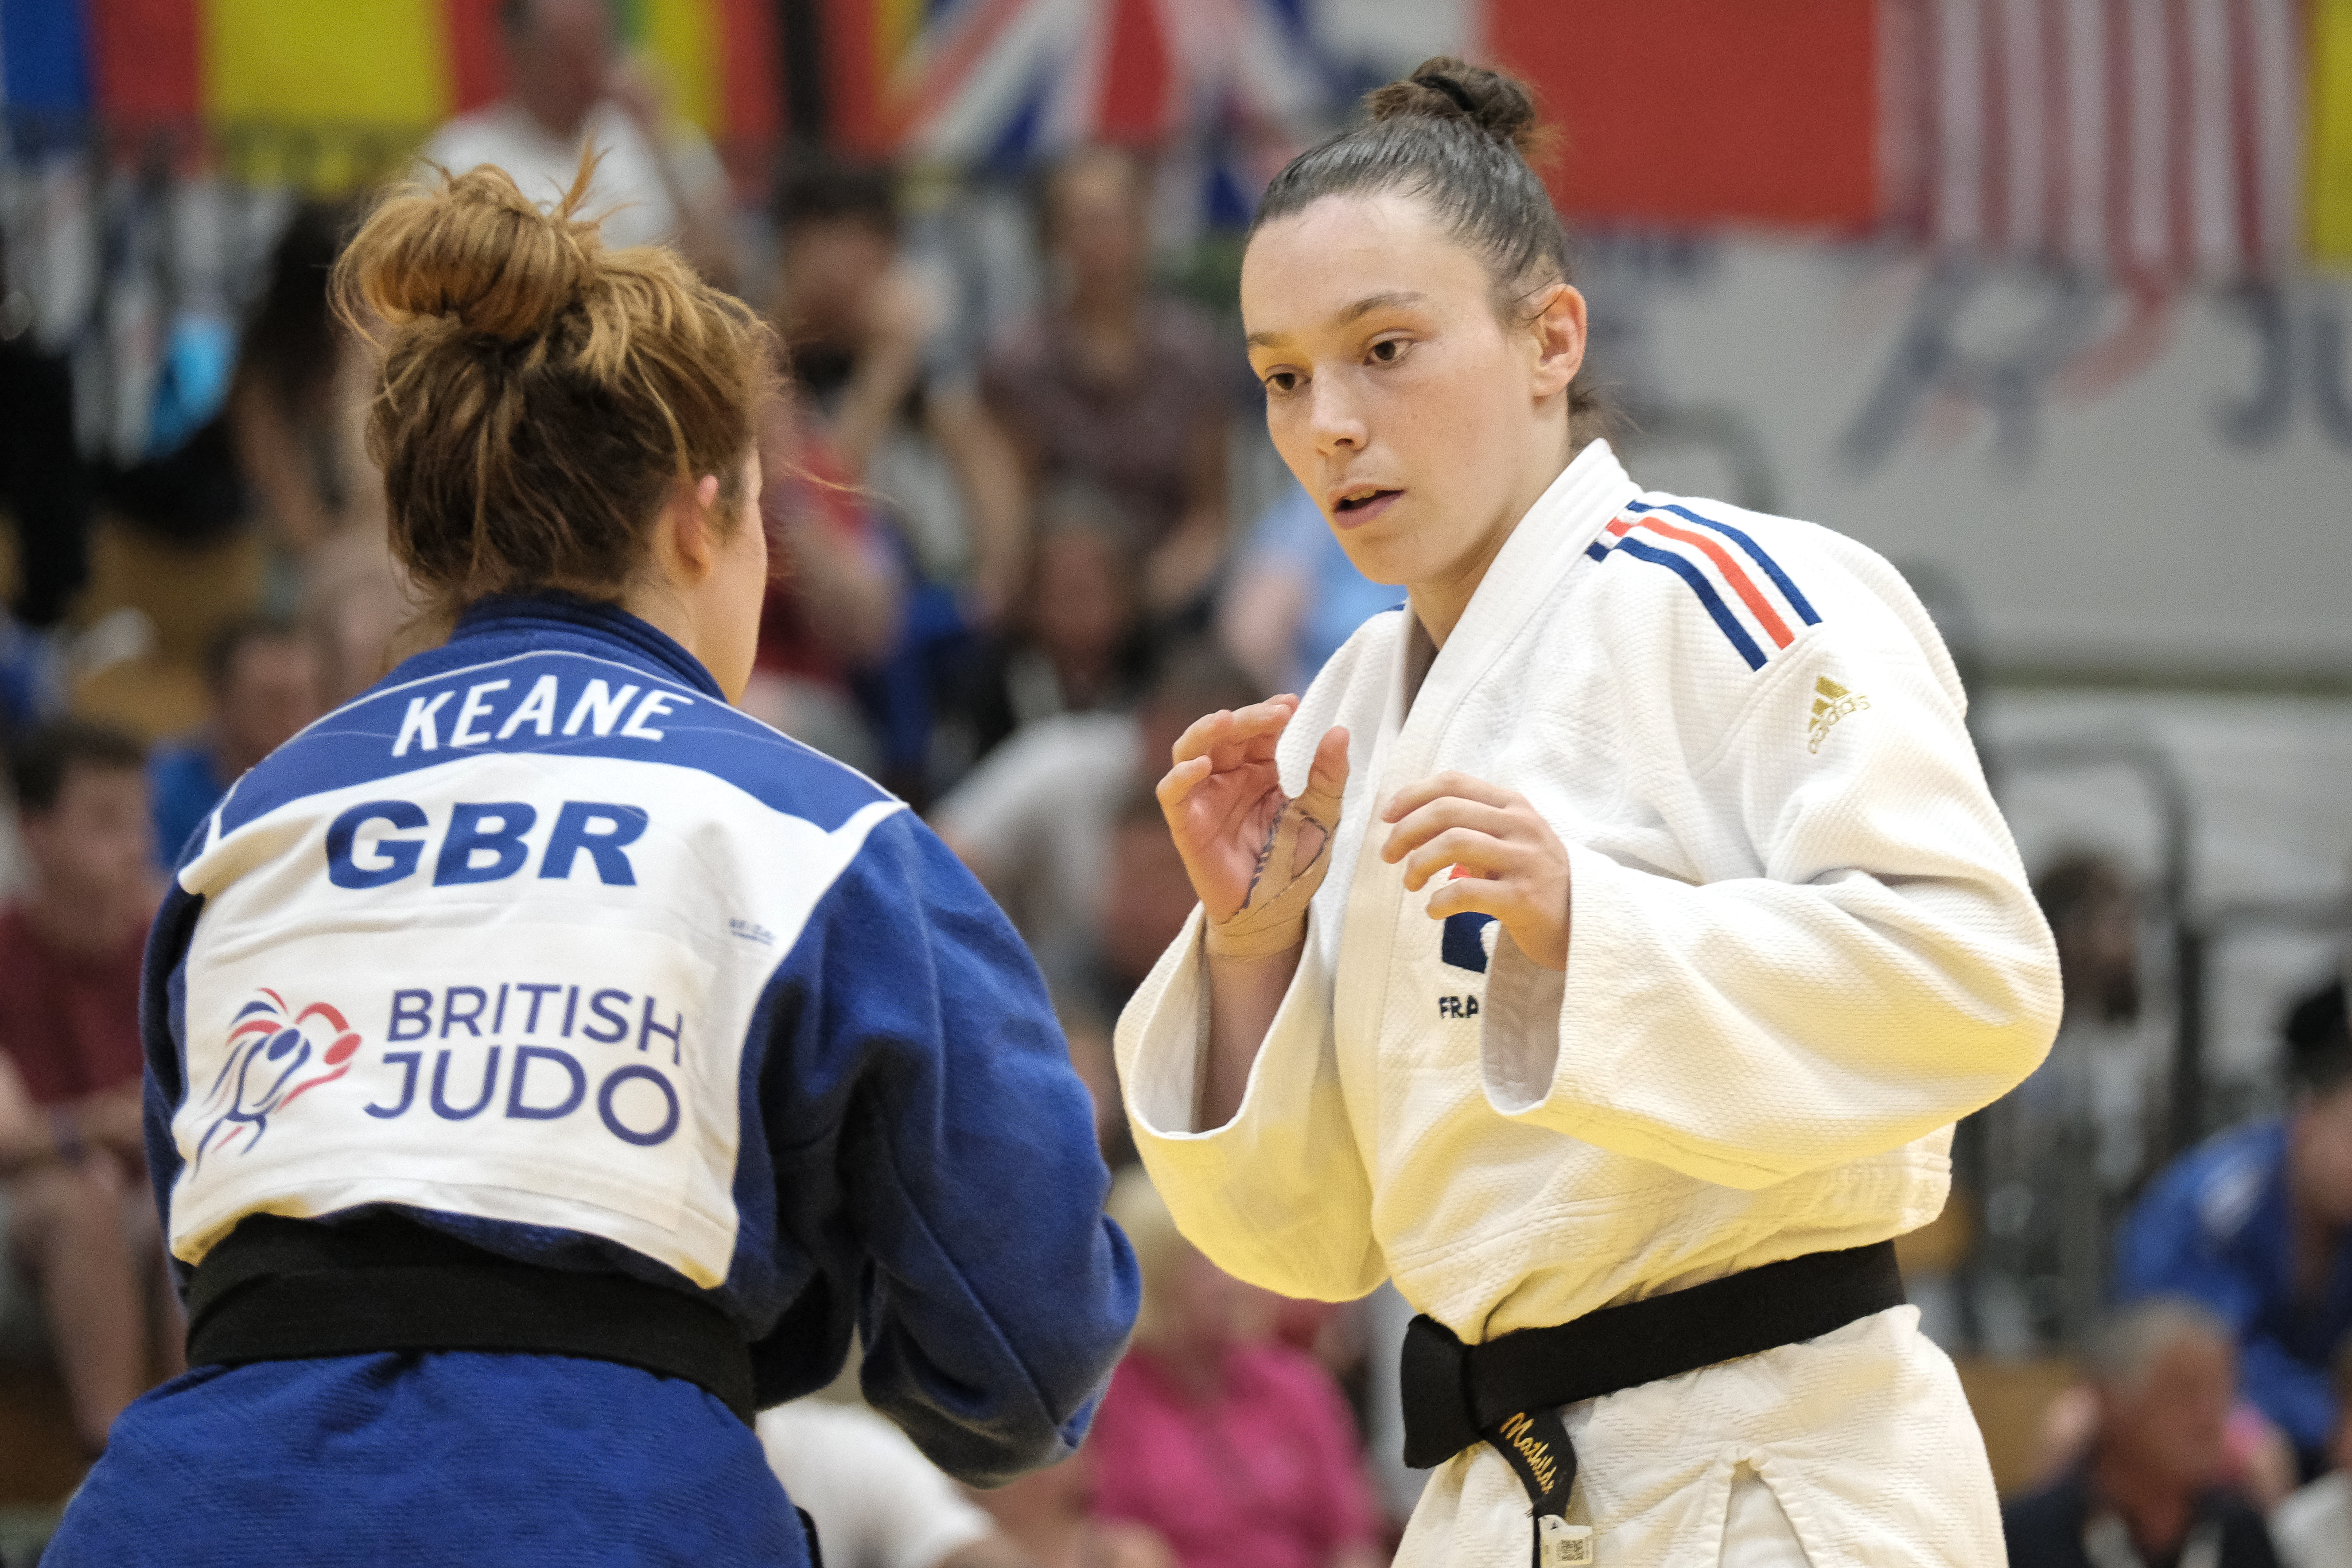 two young women taking part in judo